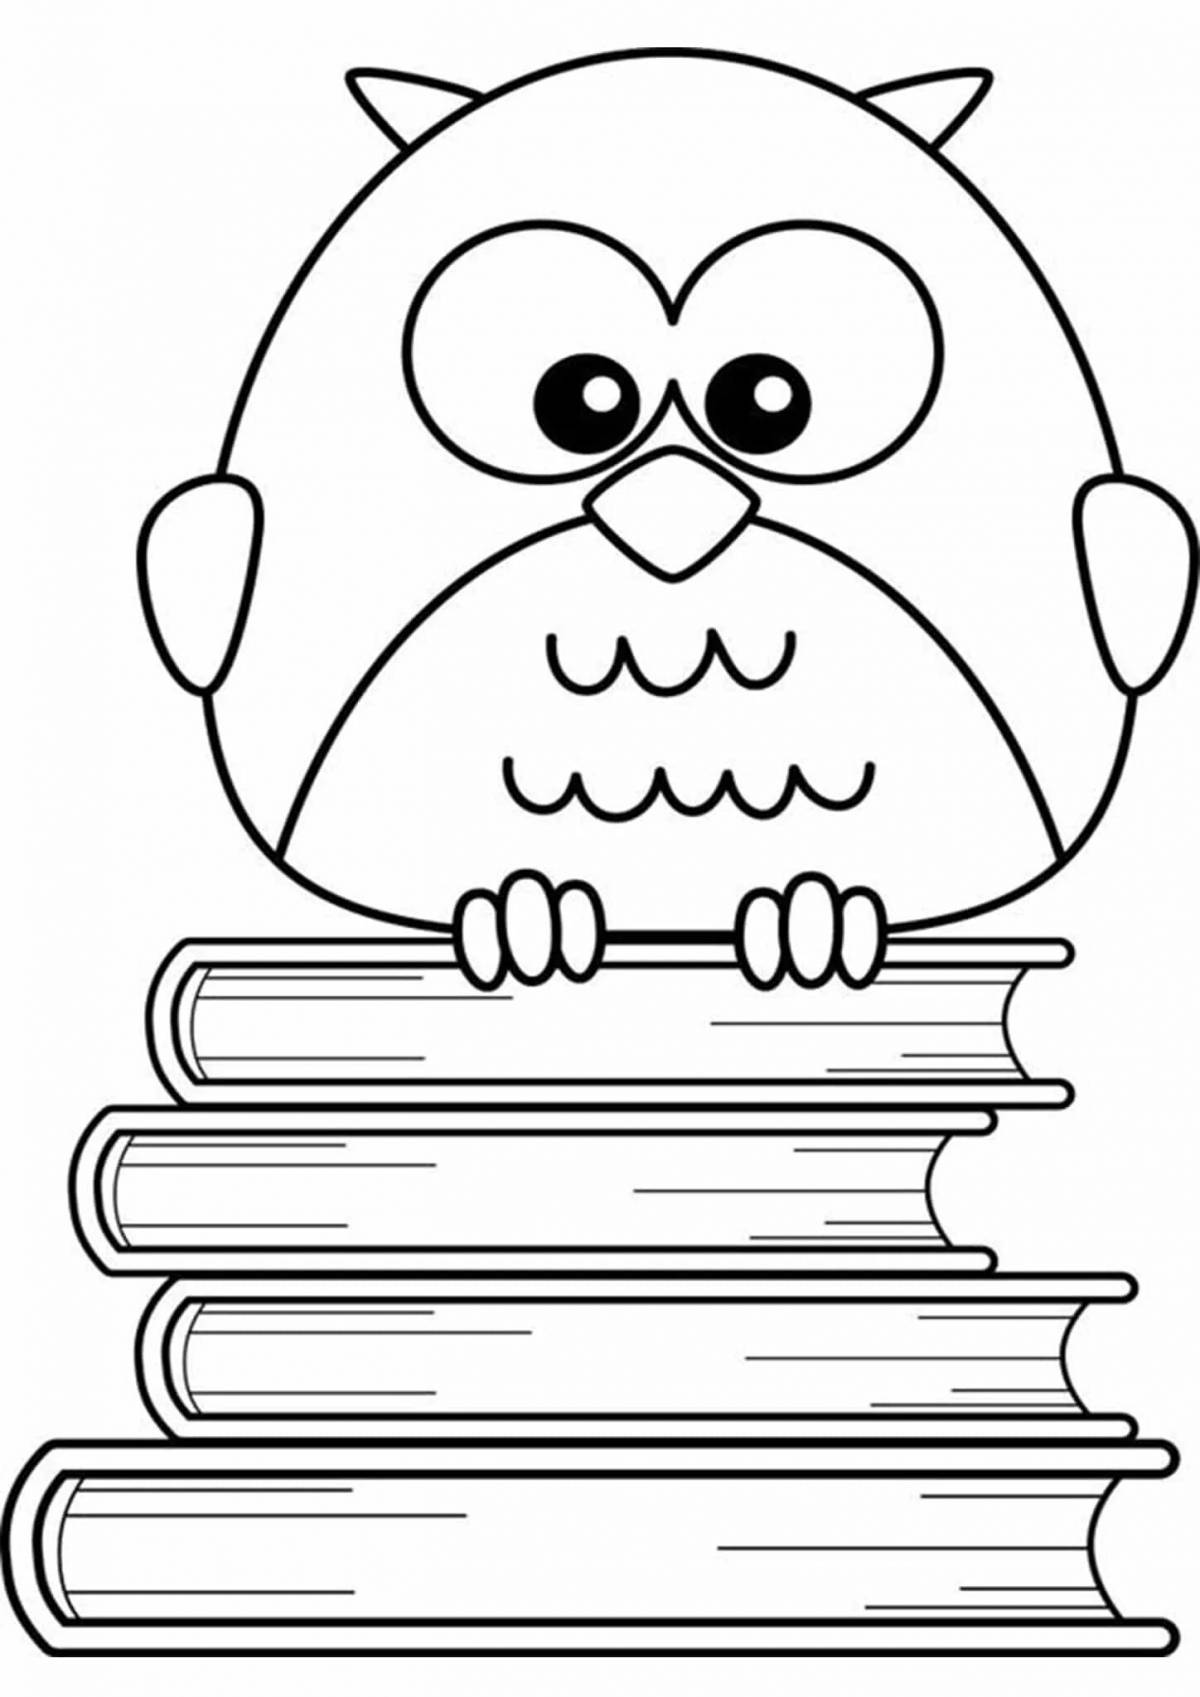 Owl with books #11